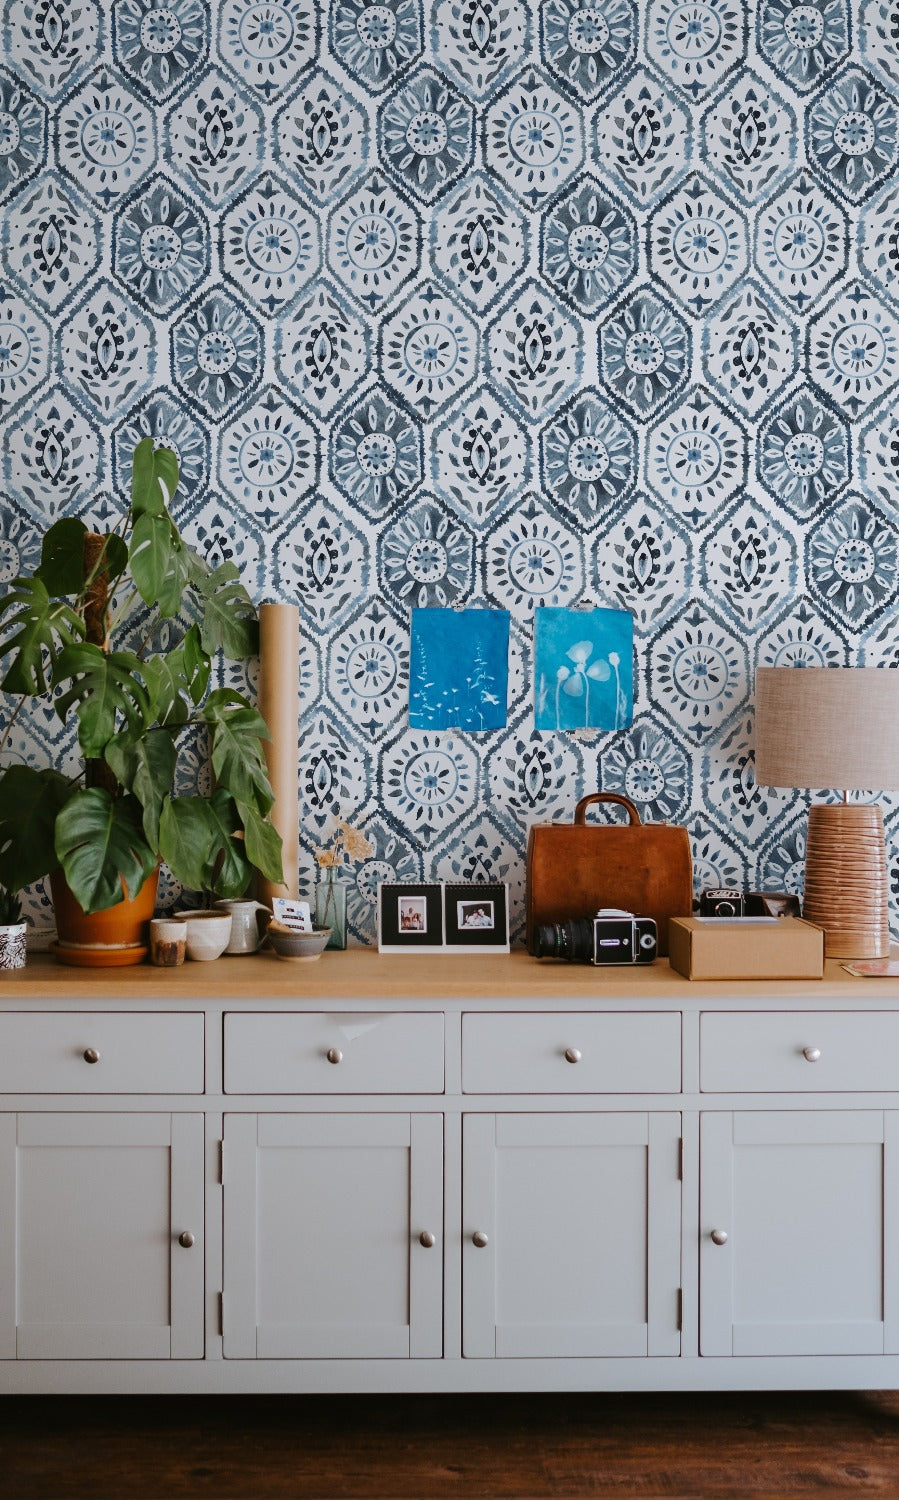 A stylish interior design featuring a white cabinet with drawers and doors against a Moroccan Tile wallpaper in indigo blue, decorated with plants, framed photos, and various knick-knacks.